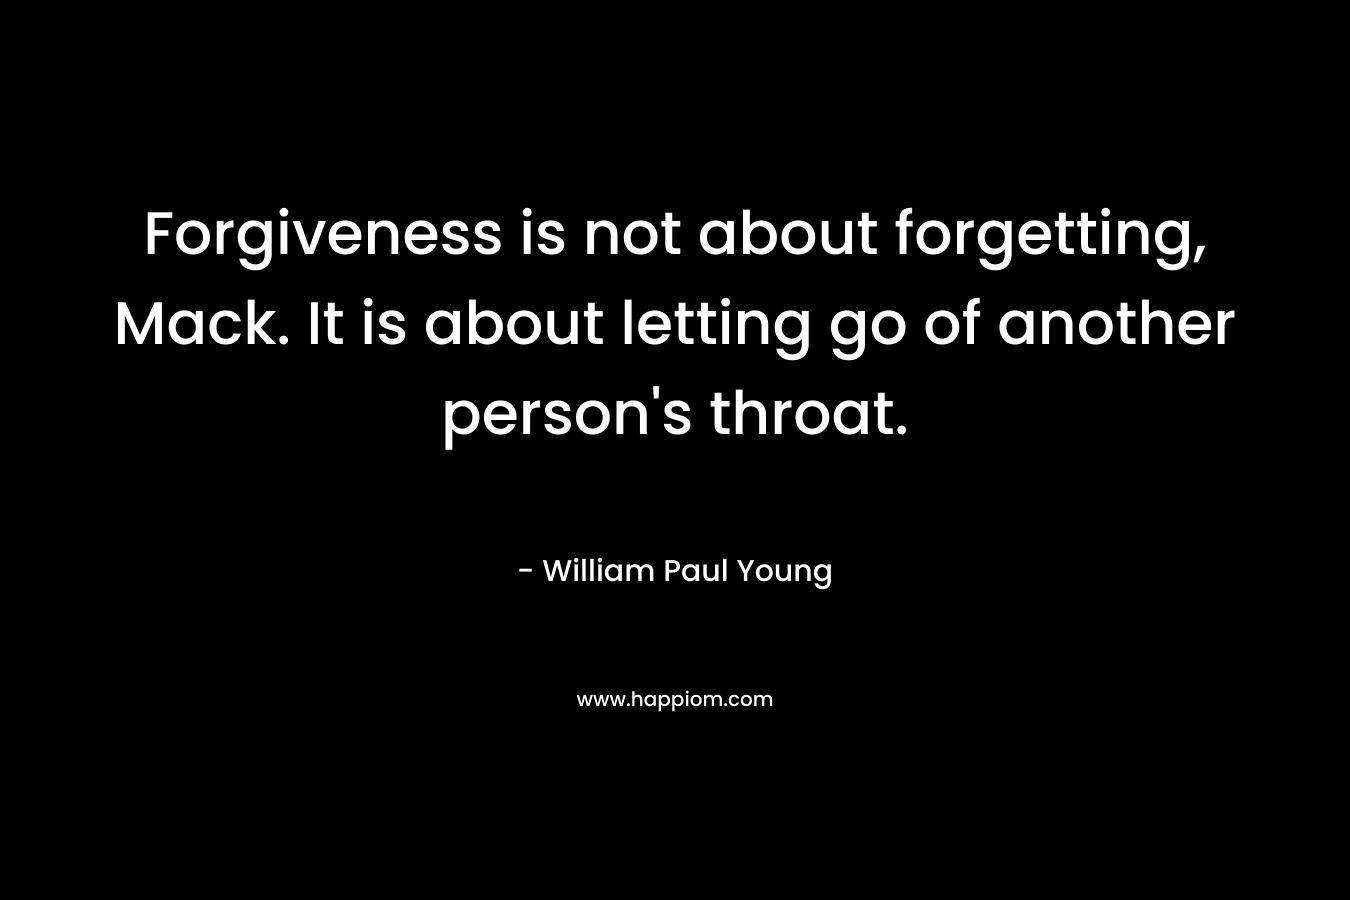 Forgiveness is not about forgetting, Mack. It is about letting go of another person's throat.